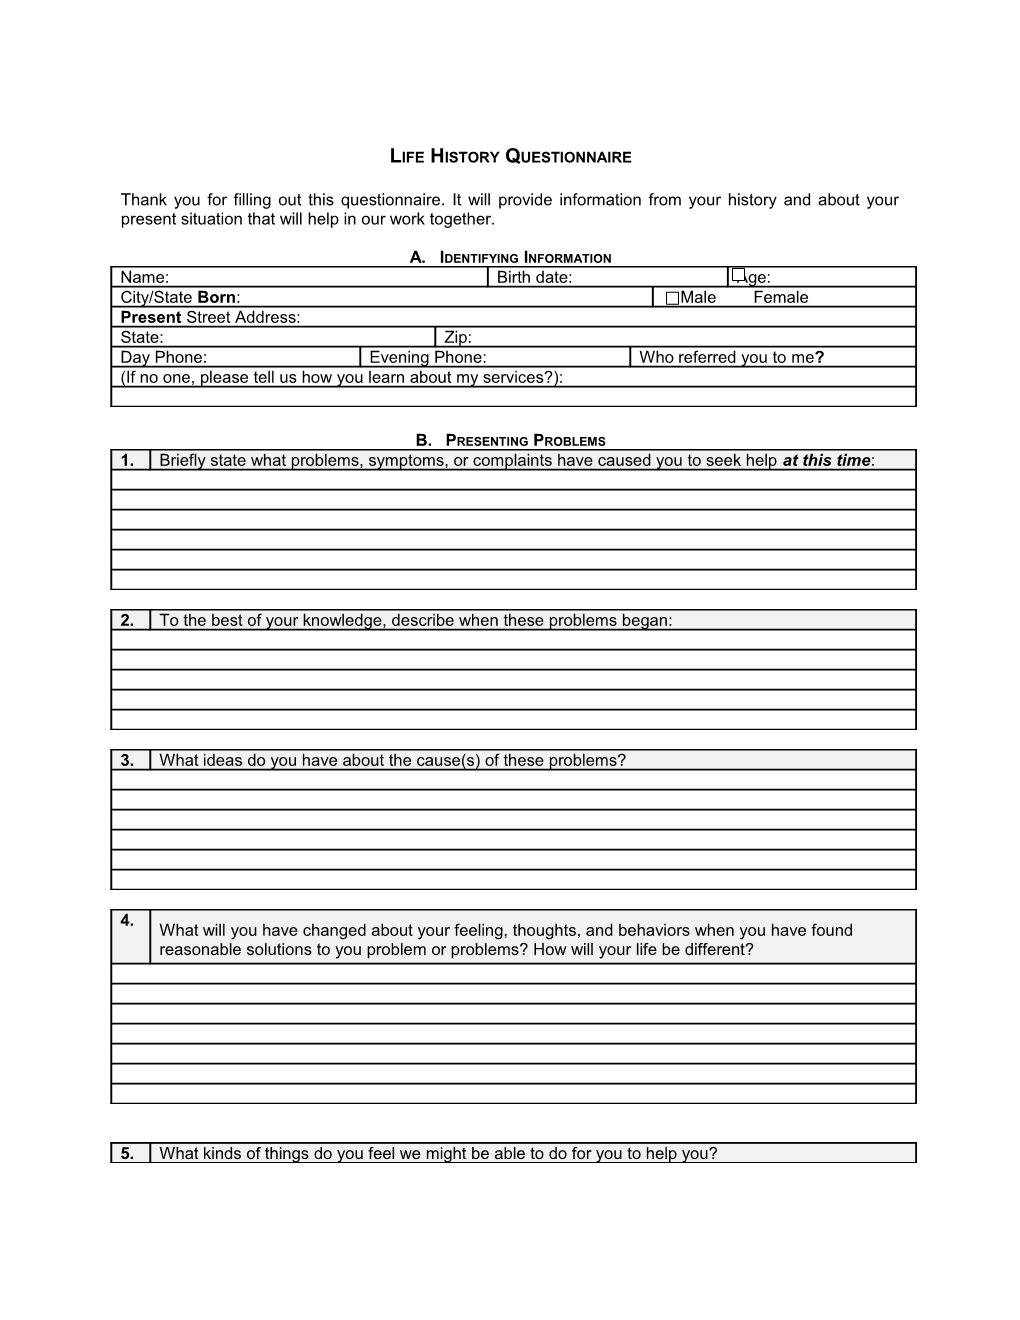 Life History Questionnaire